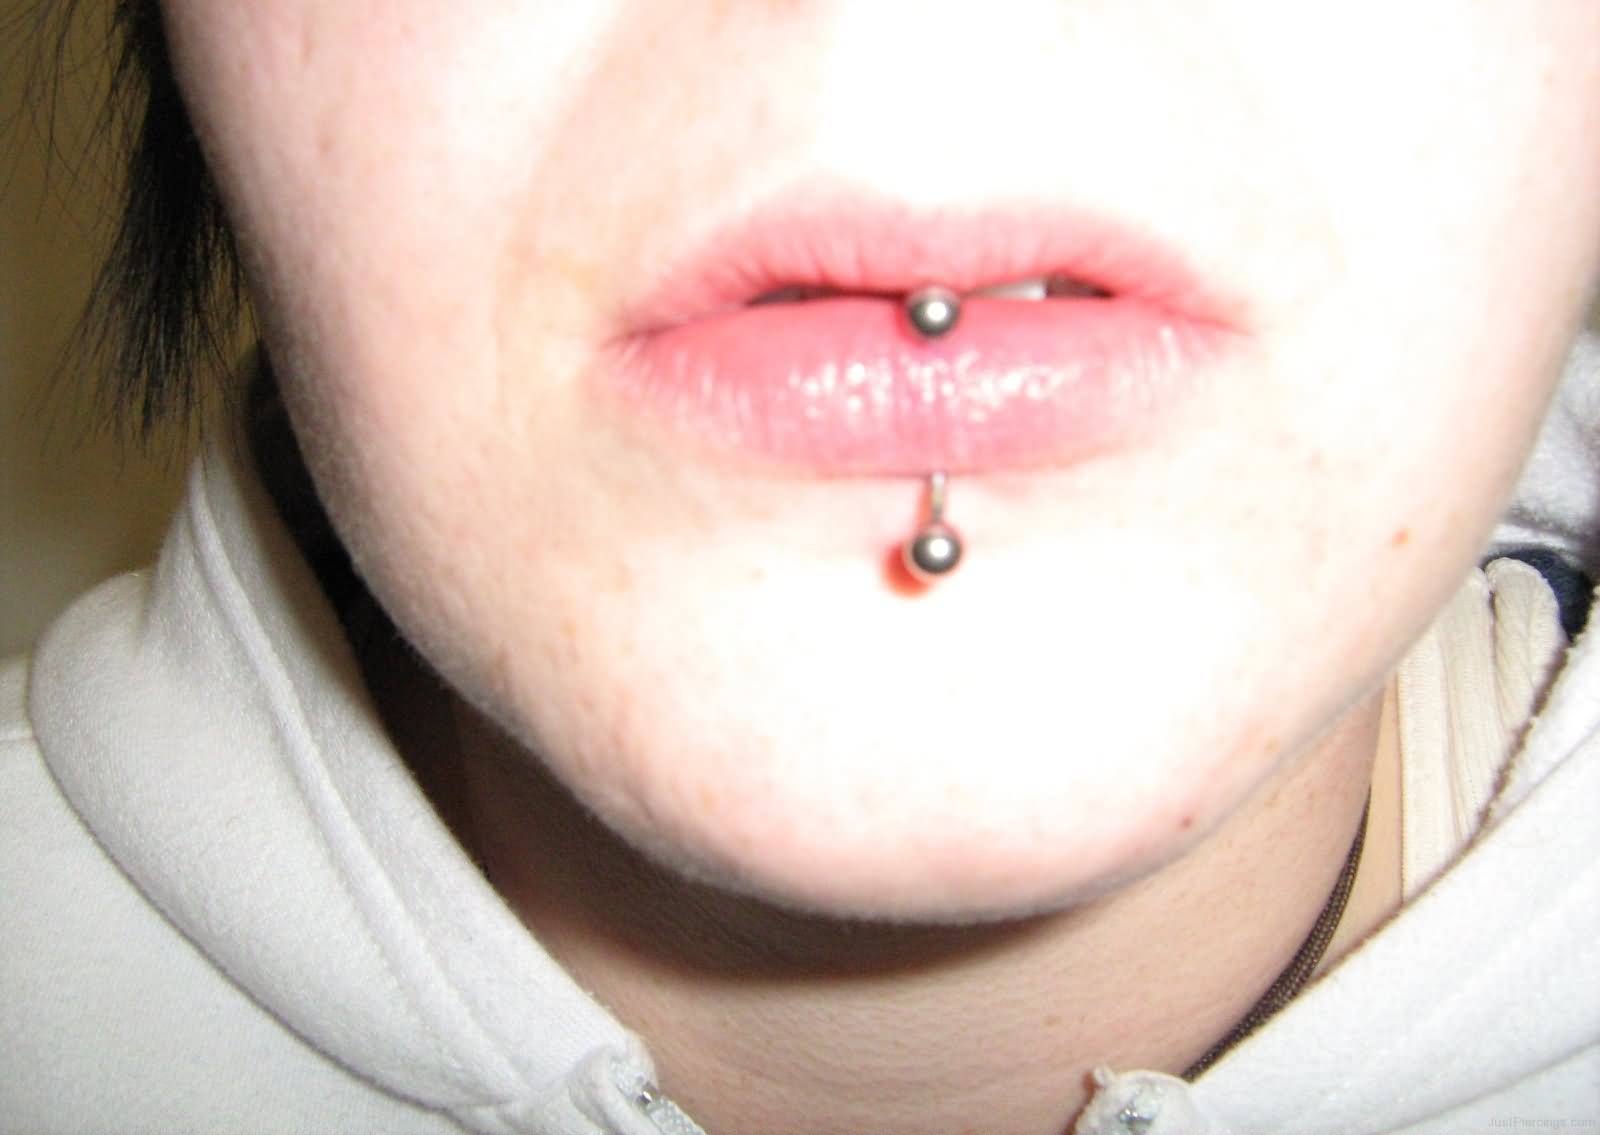 Silver Barbell Center Labret Piercing Closeup Image